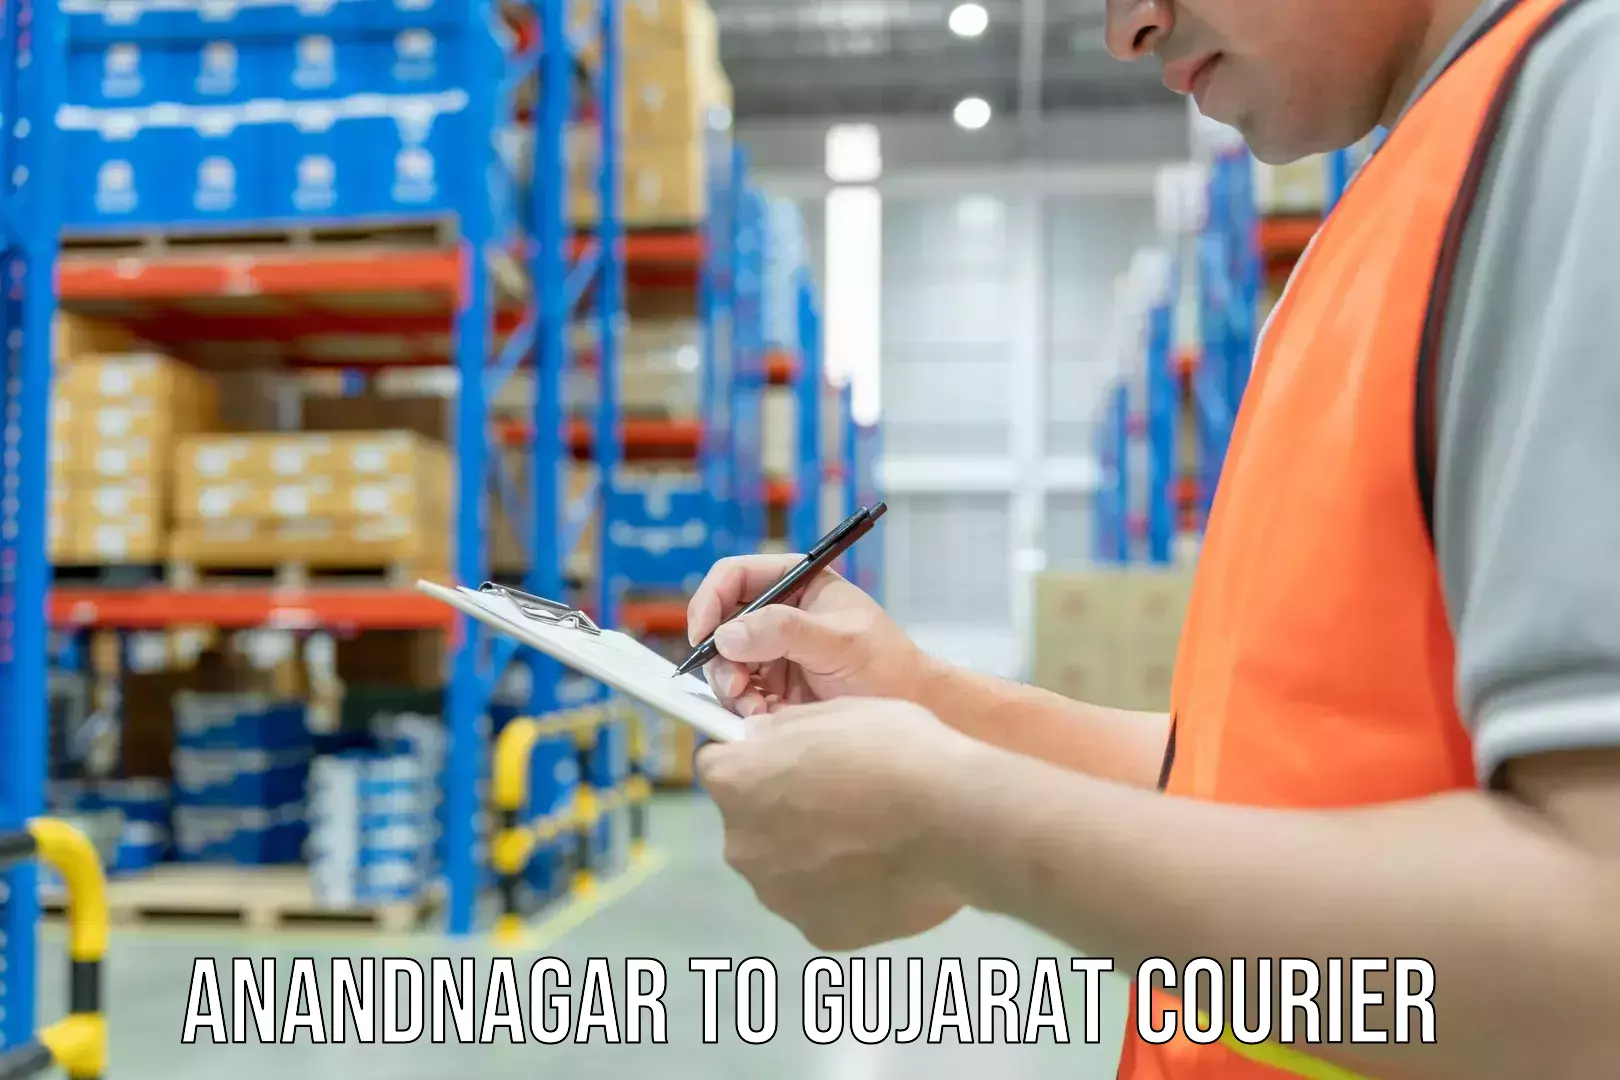 On-call courier service Anandnagar to Gujarat